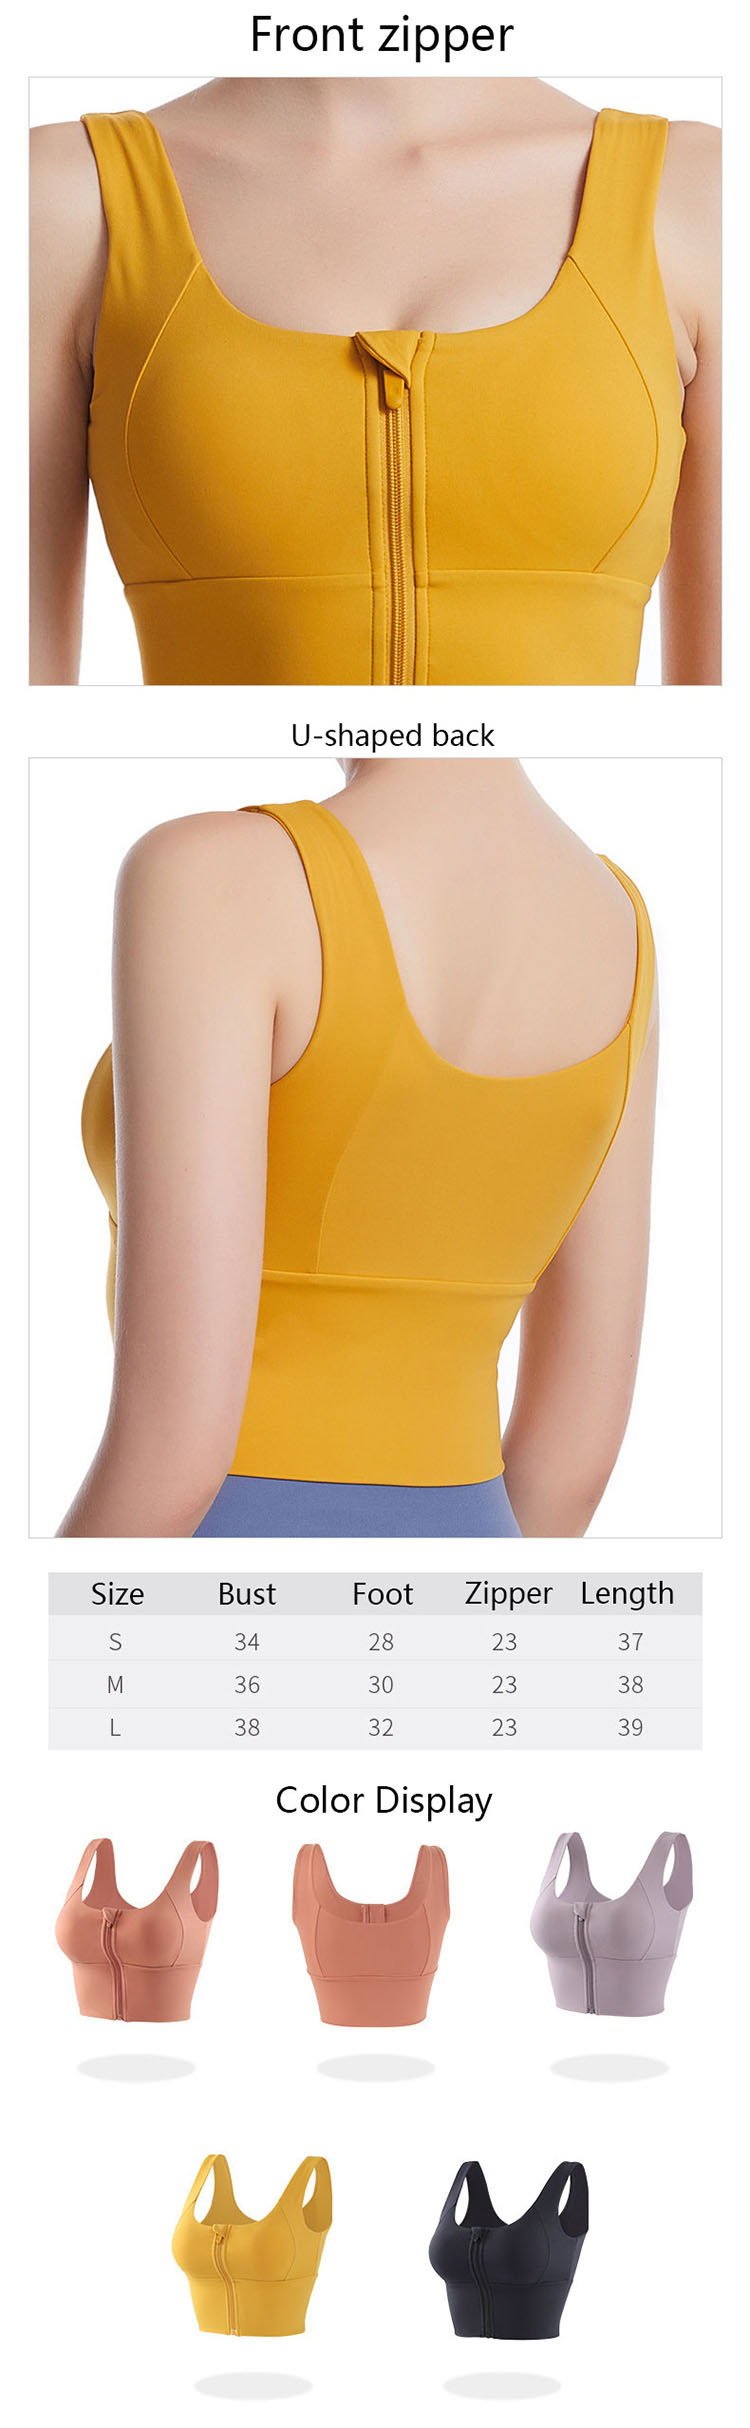 The zip up sports bra is the stitching of the basic bra with embossed line decorations